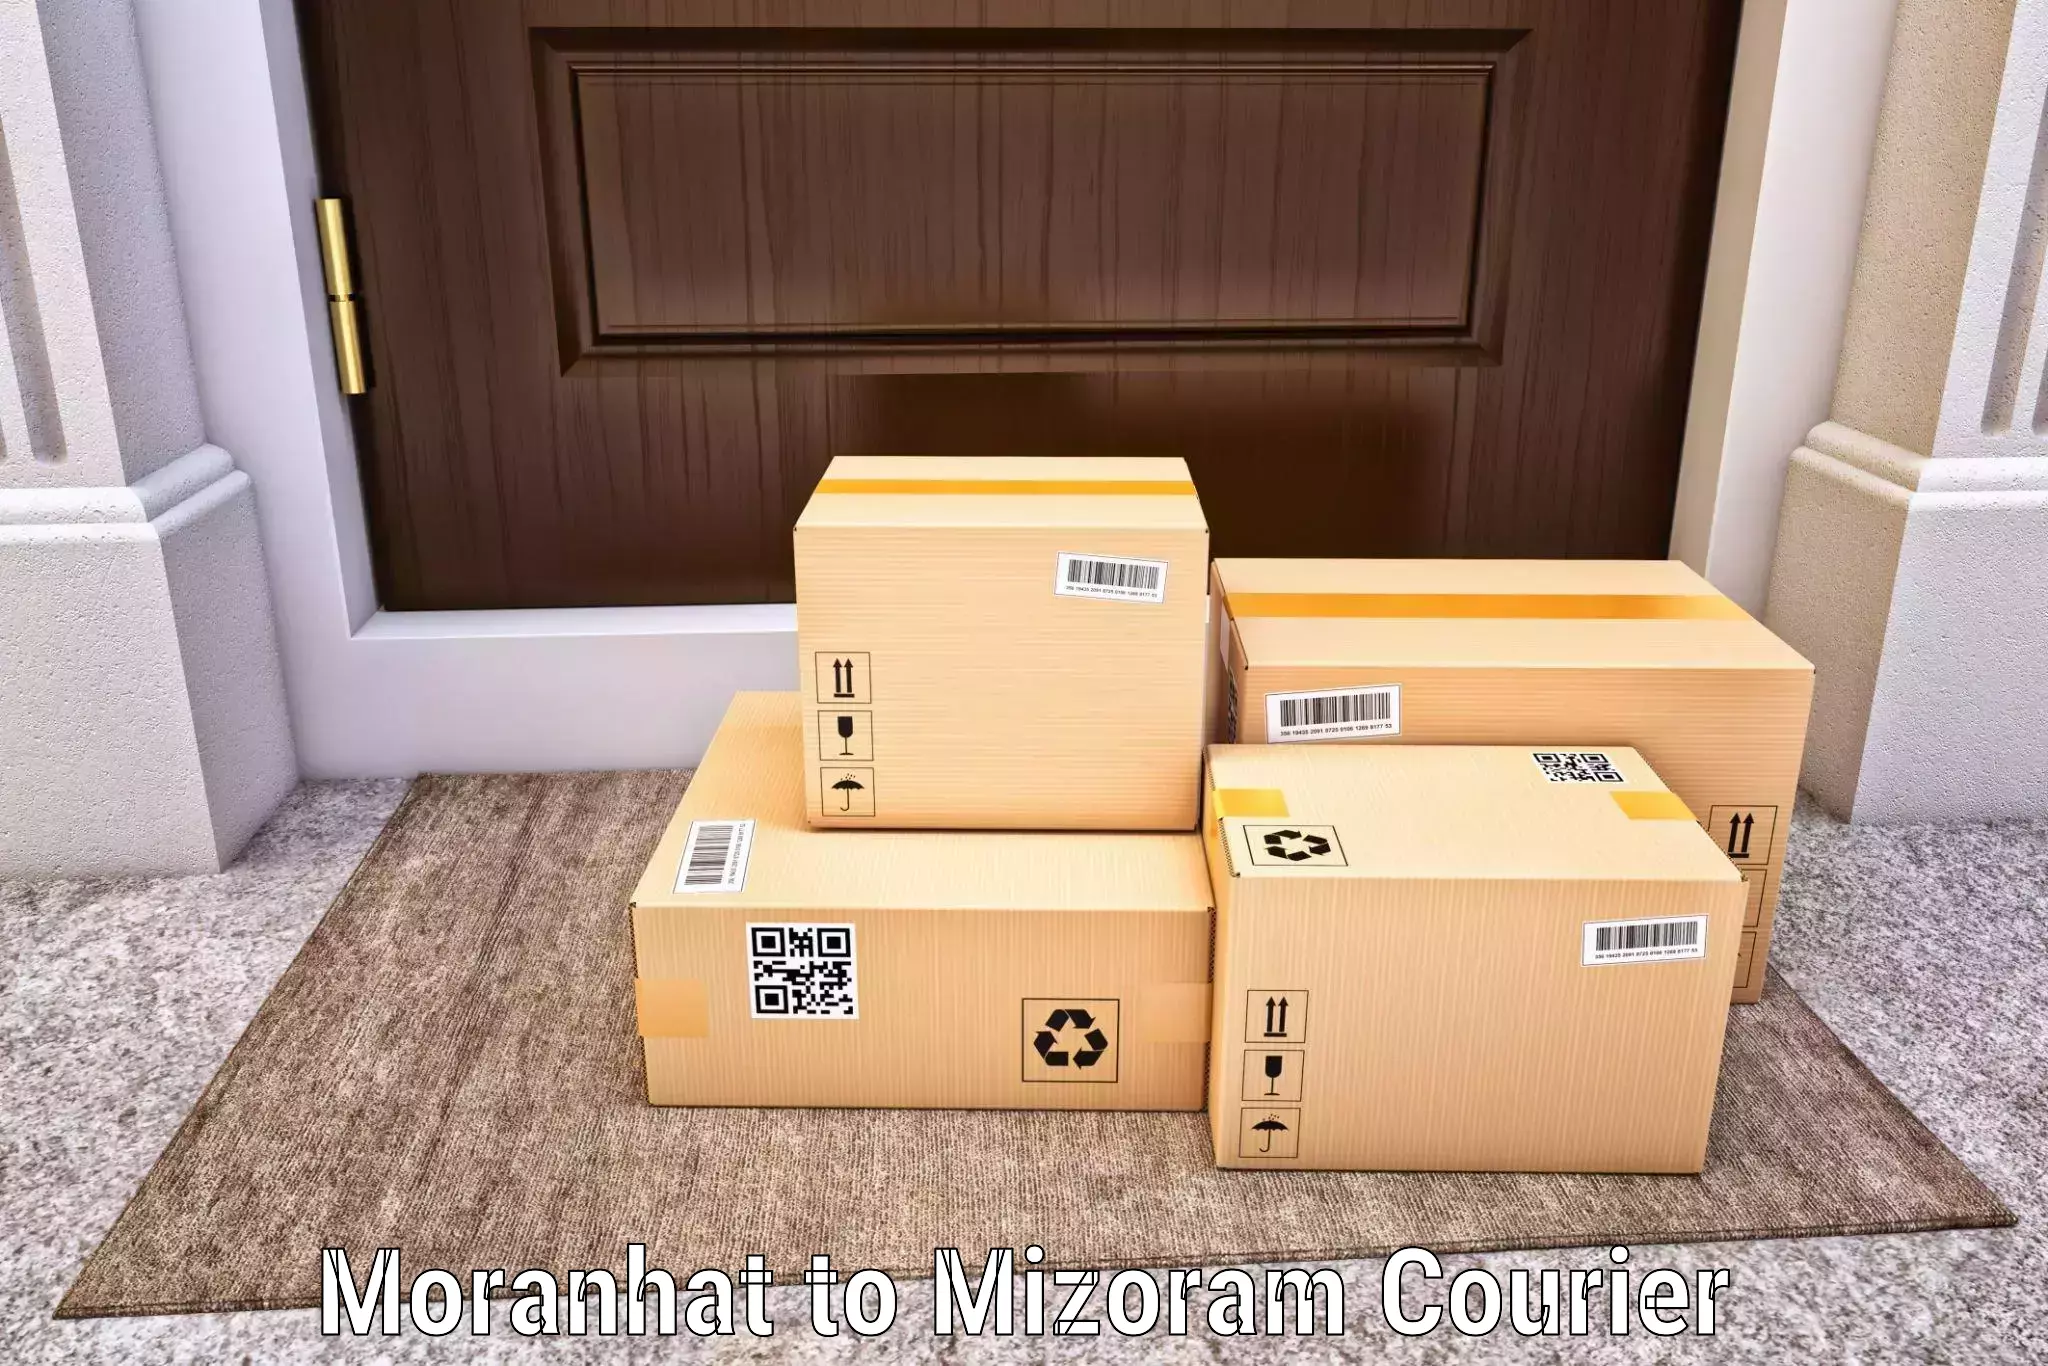 State-of-the-art courier technology Moranhat to Mizoram